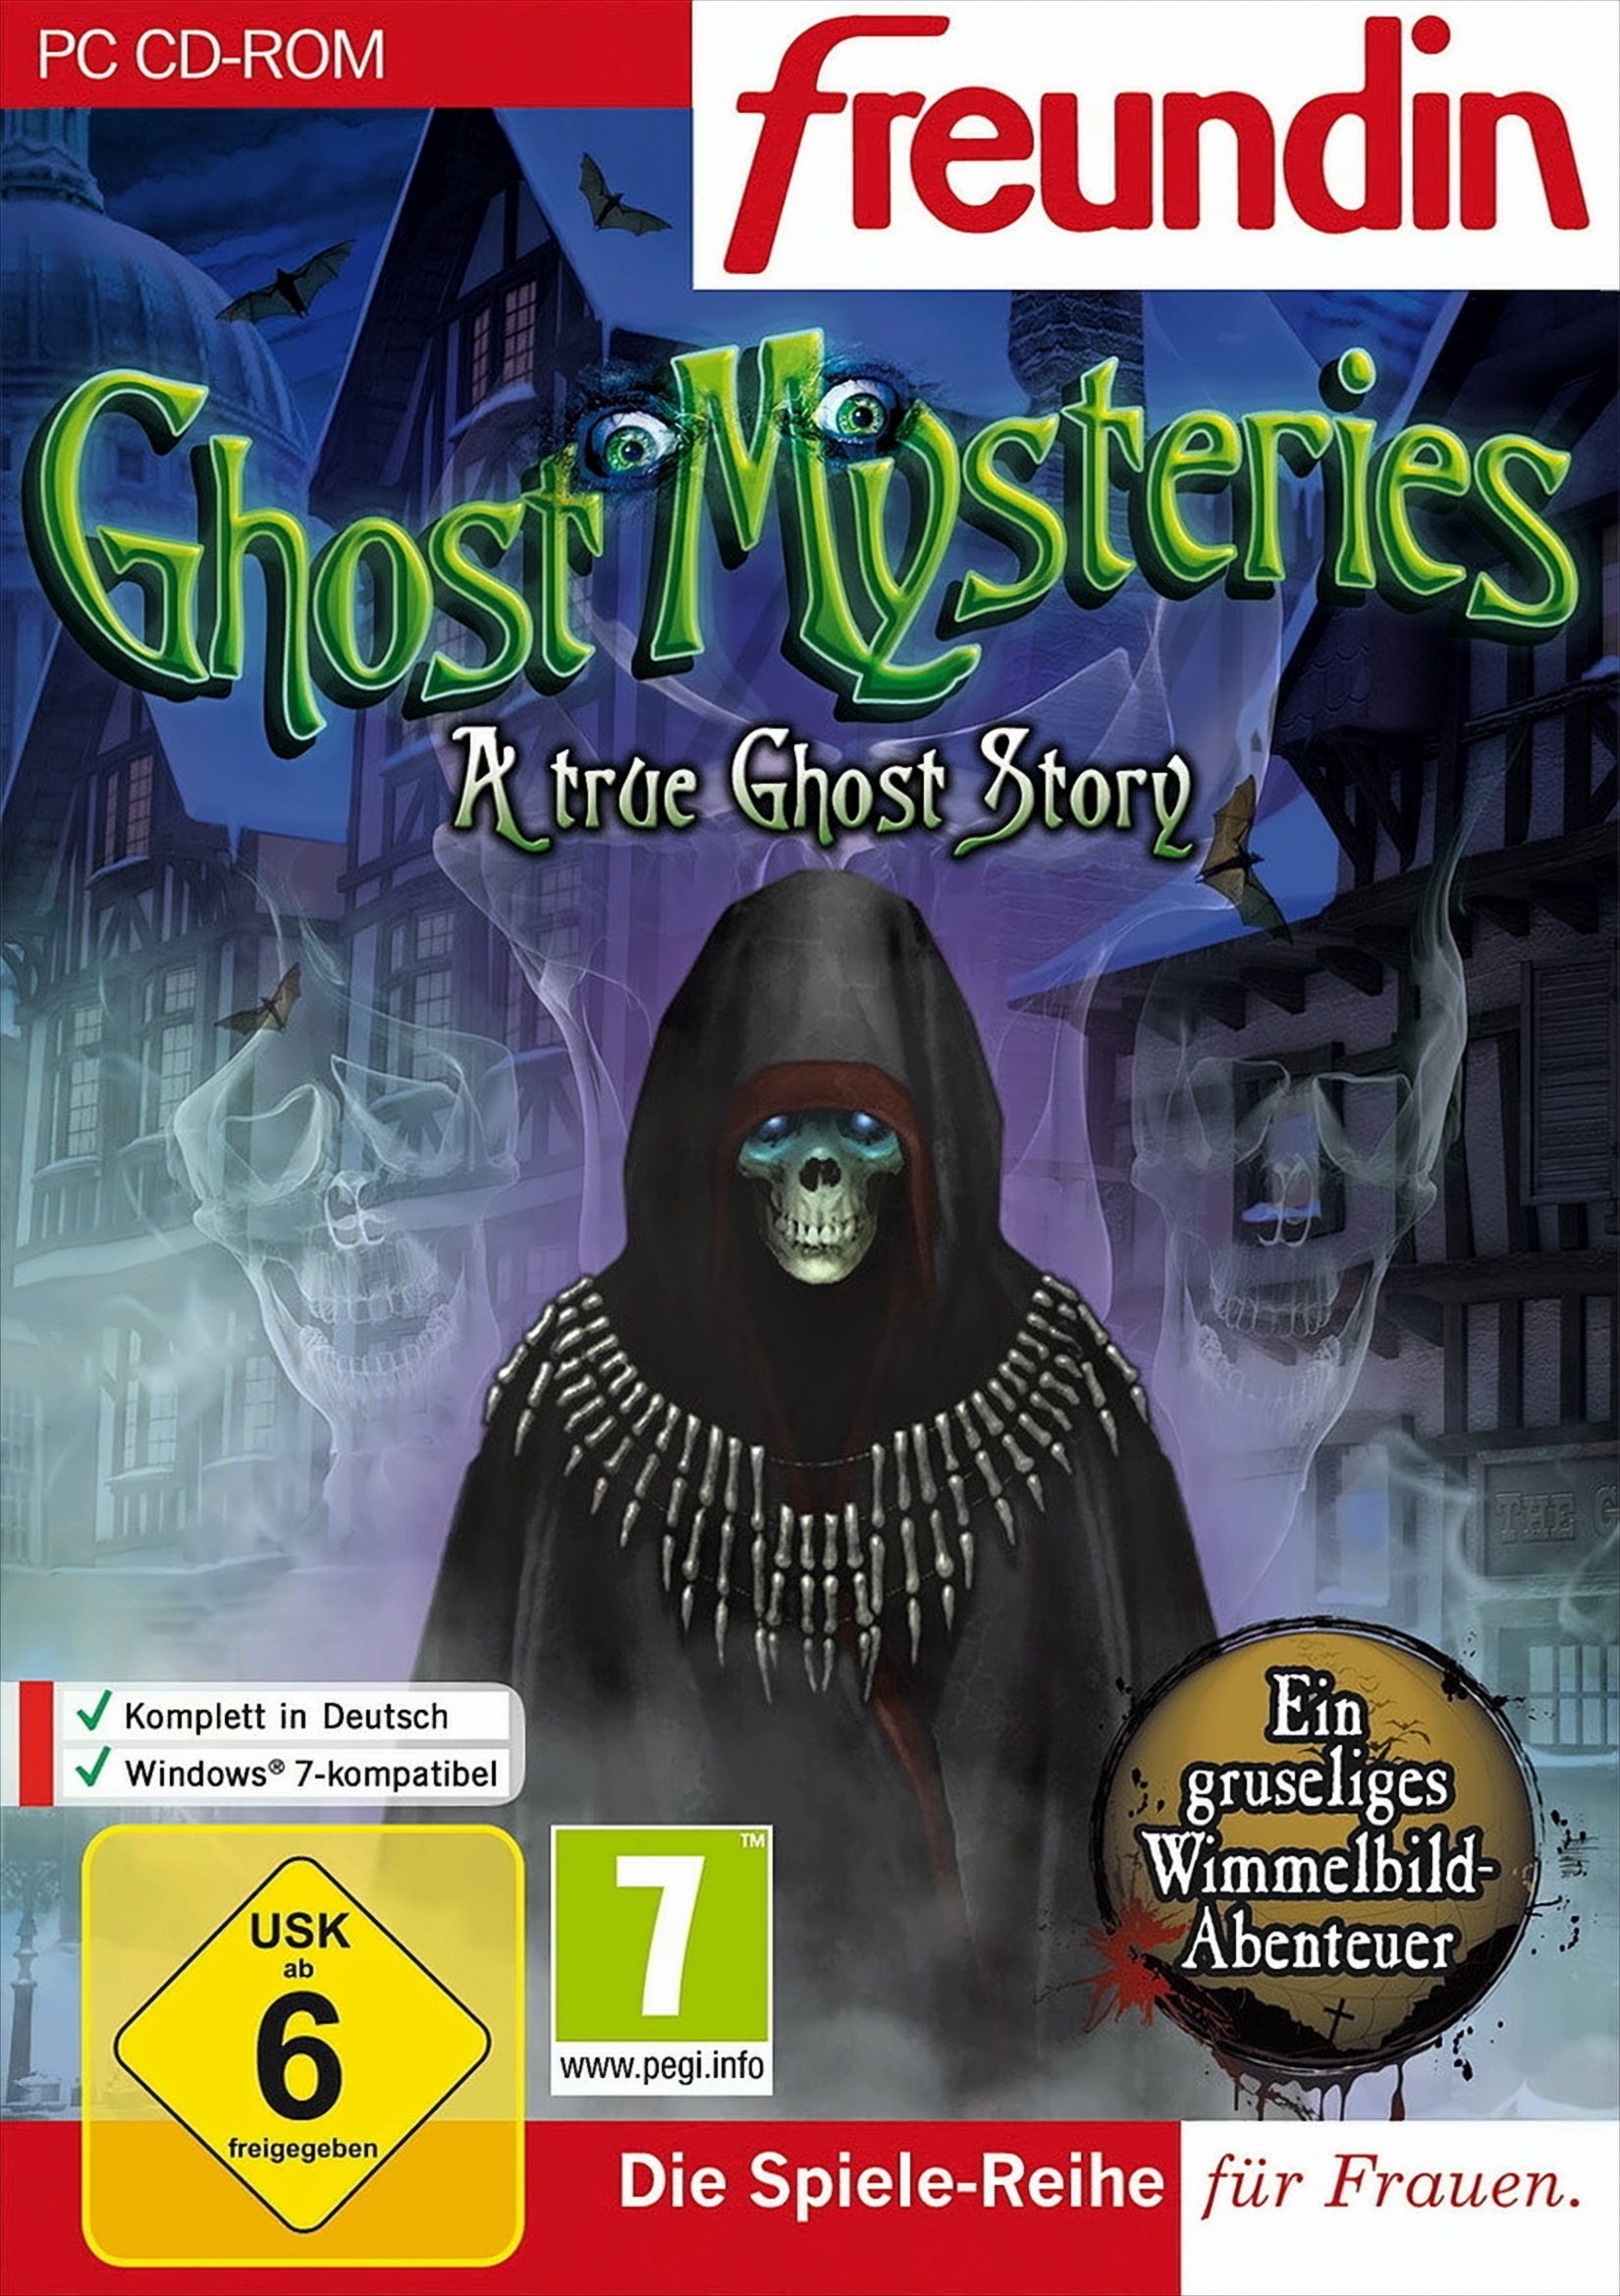 Ghost Mysteries: A True Ghost Story PC